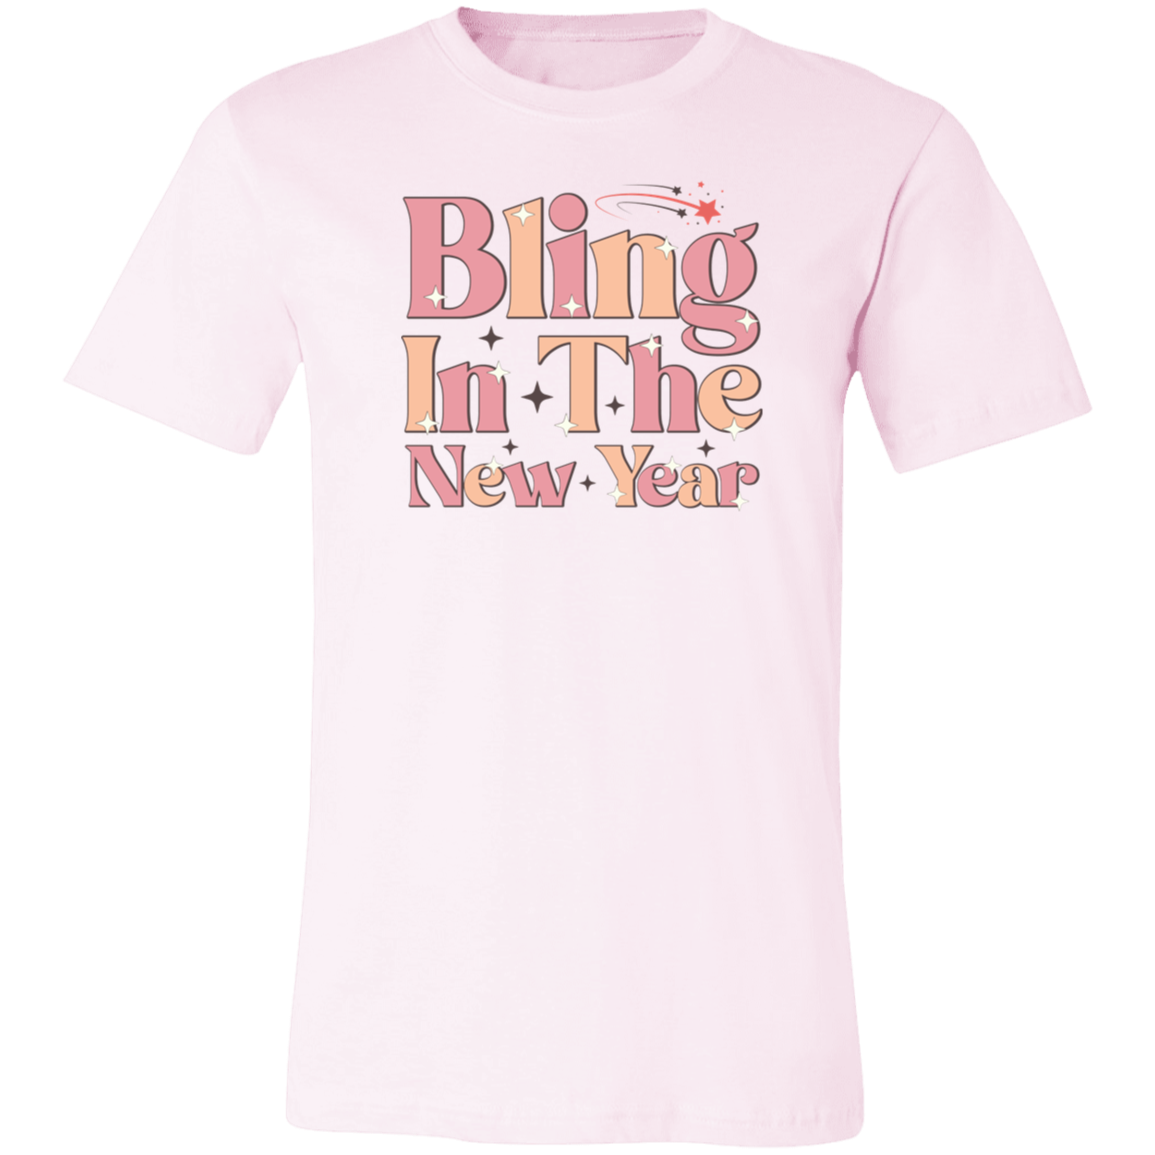 Bling In the New Year Shirt